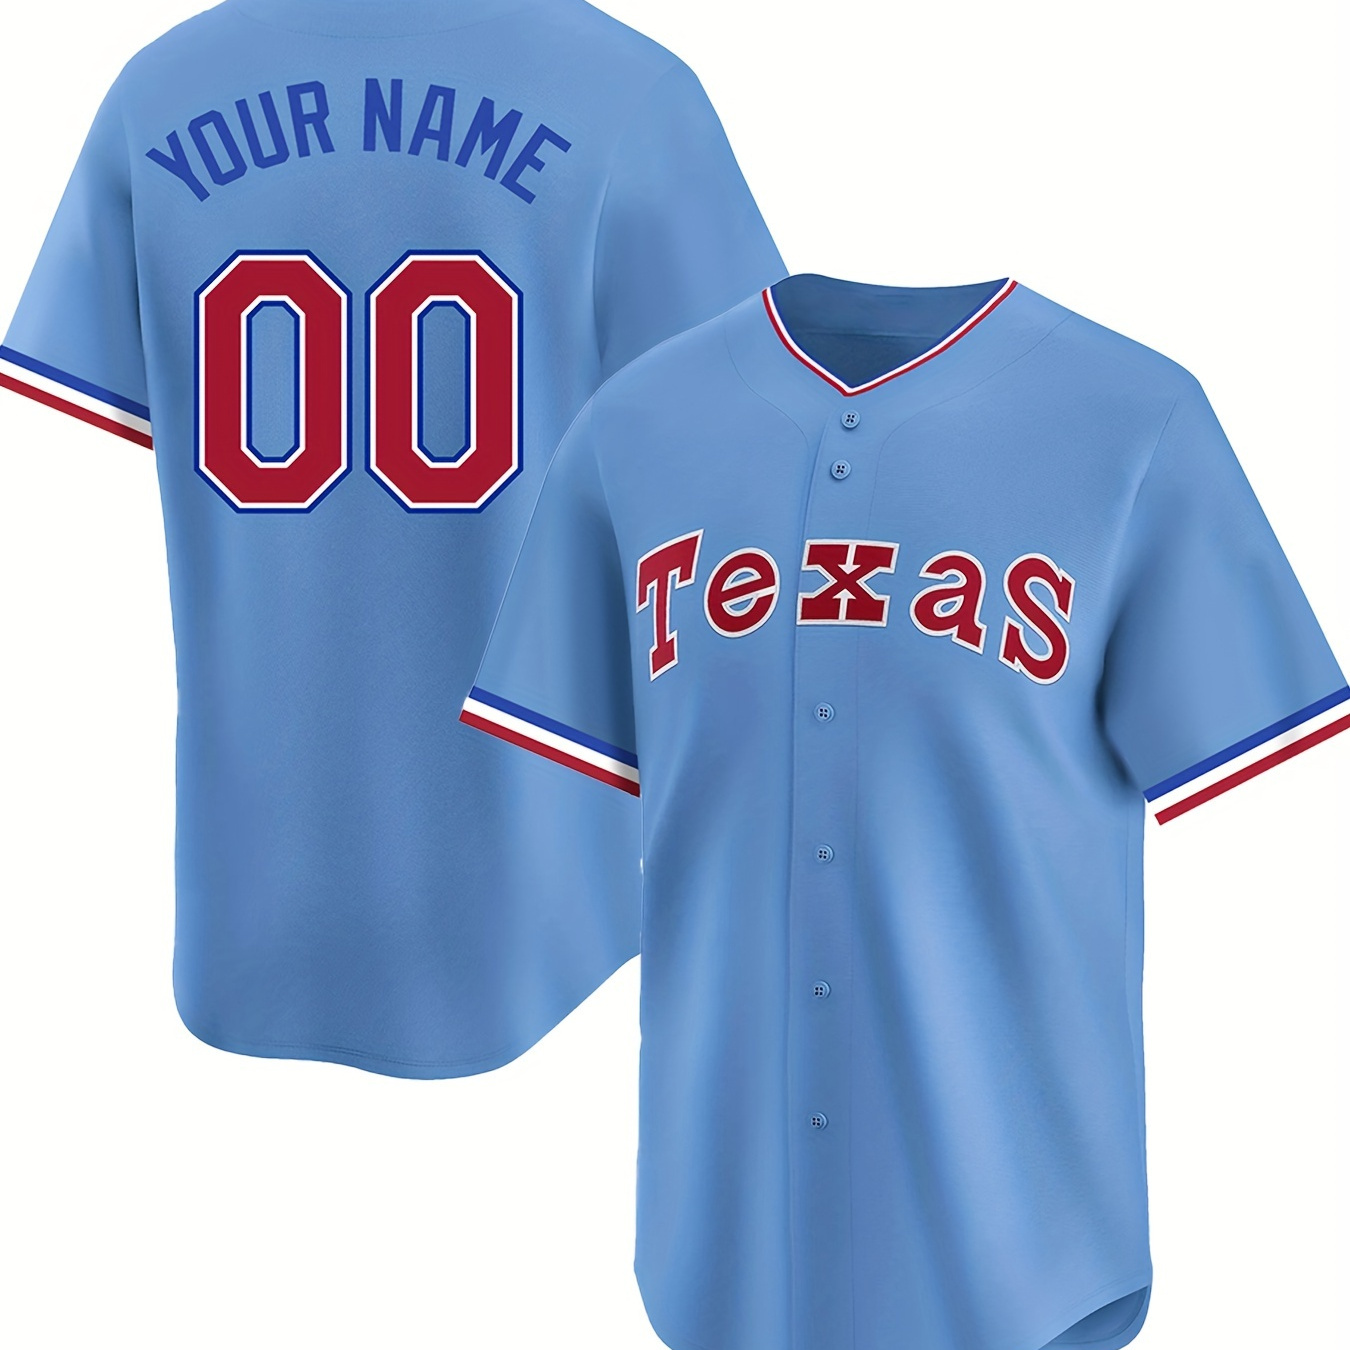 

Men's Customized Name And Number Short Sleeve V-neck Baseball Jersey, Tailored To Your Preference, Comfy Top For Summer Sport